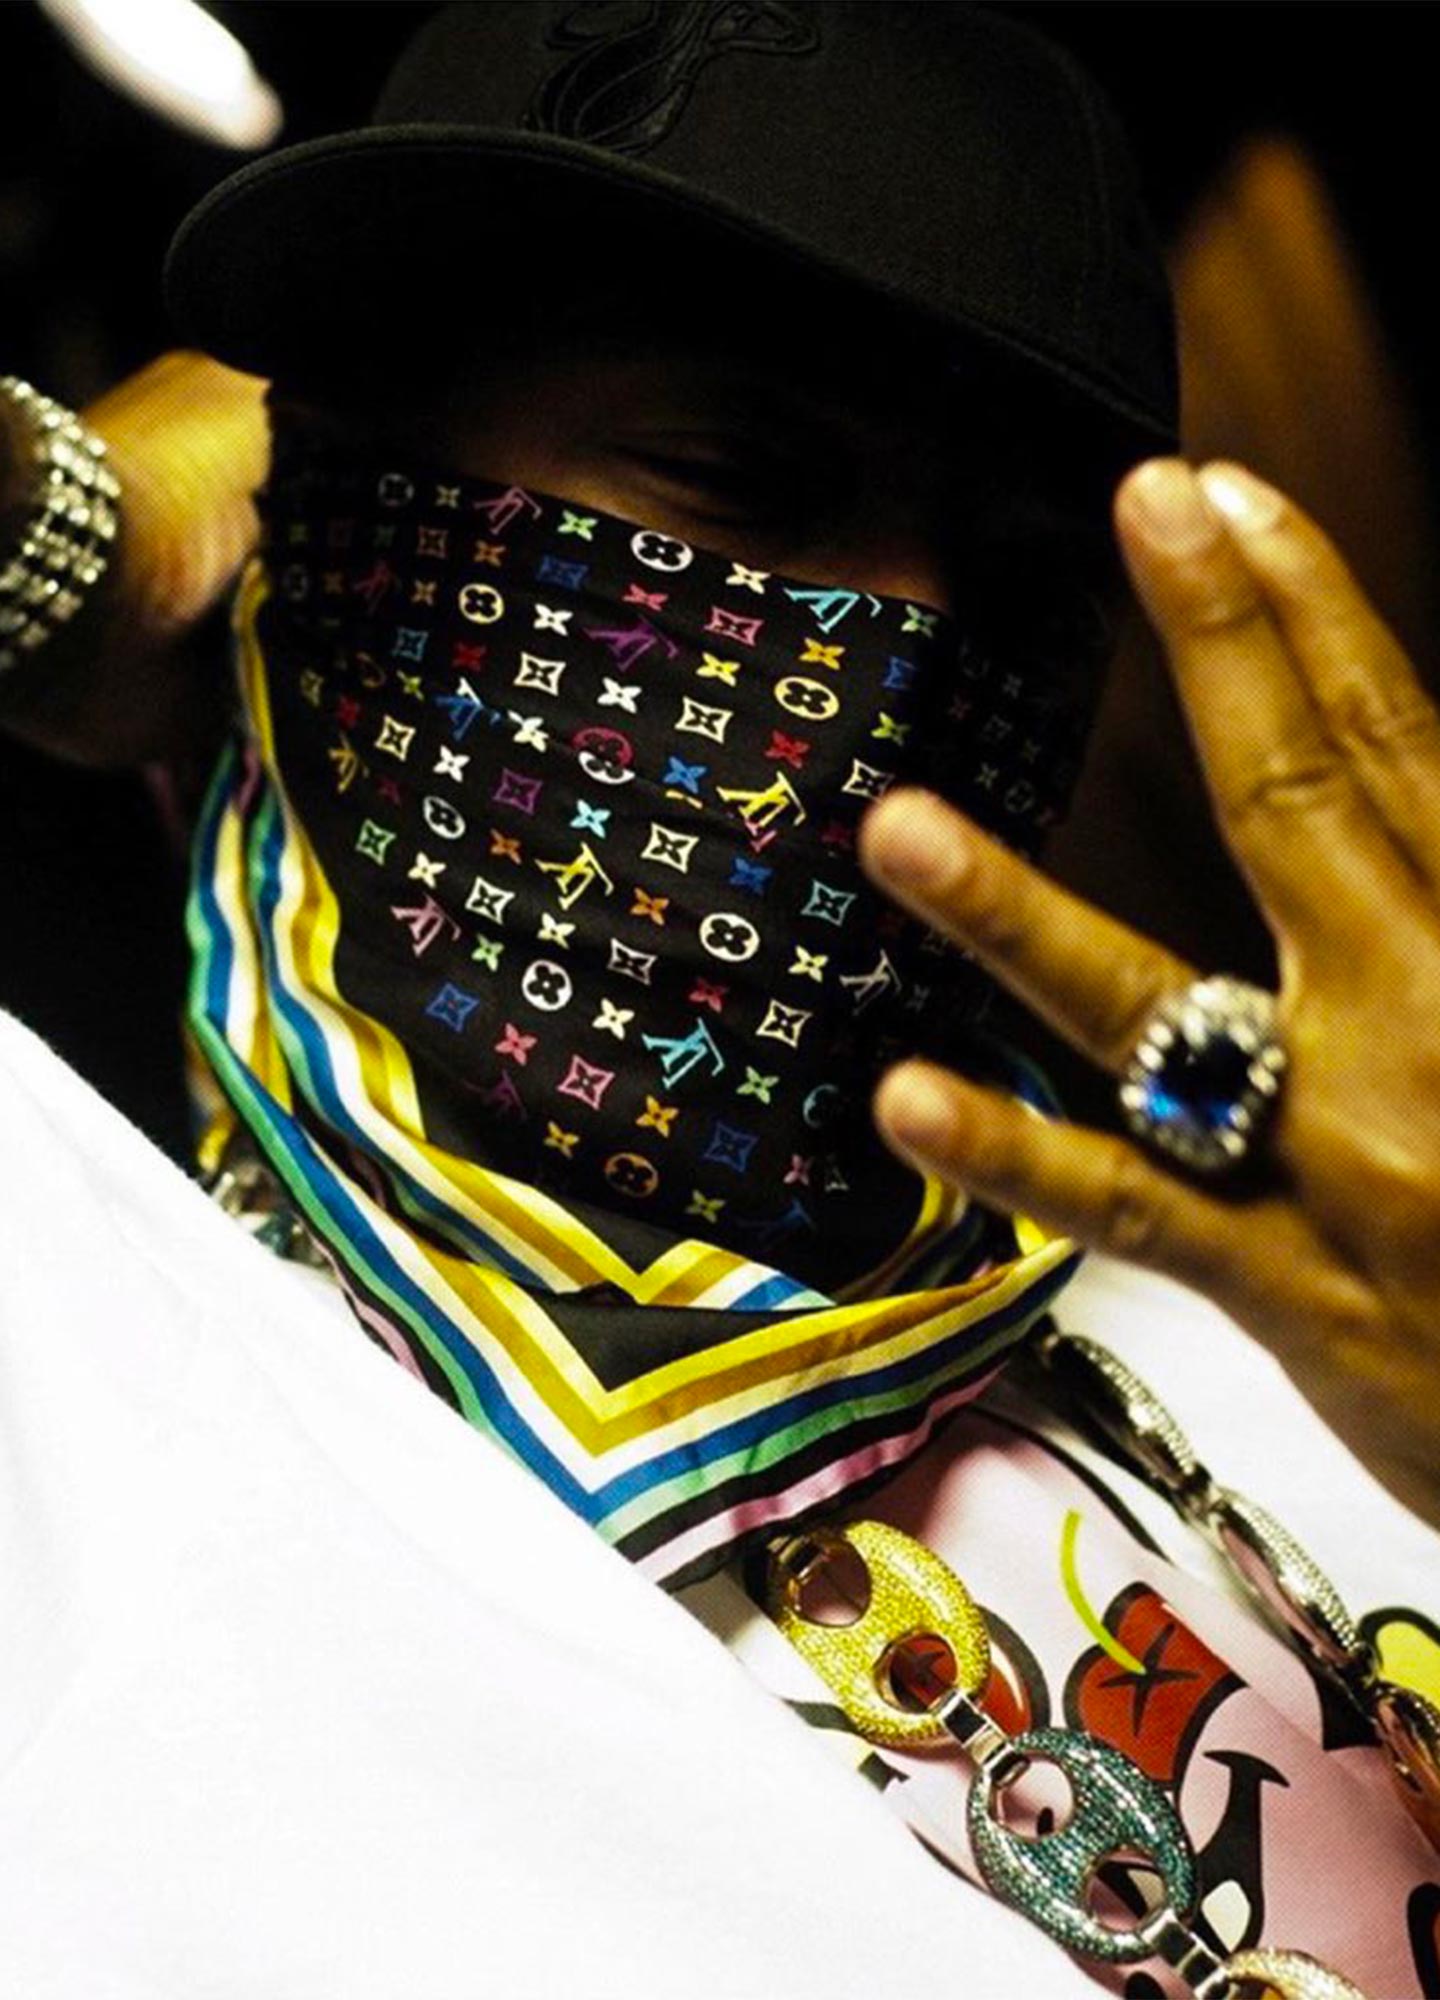 Hitmakers Williams shrouded in an LV-branded scarf